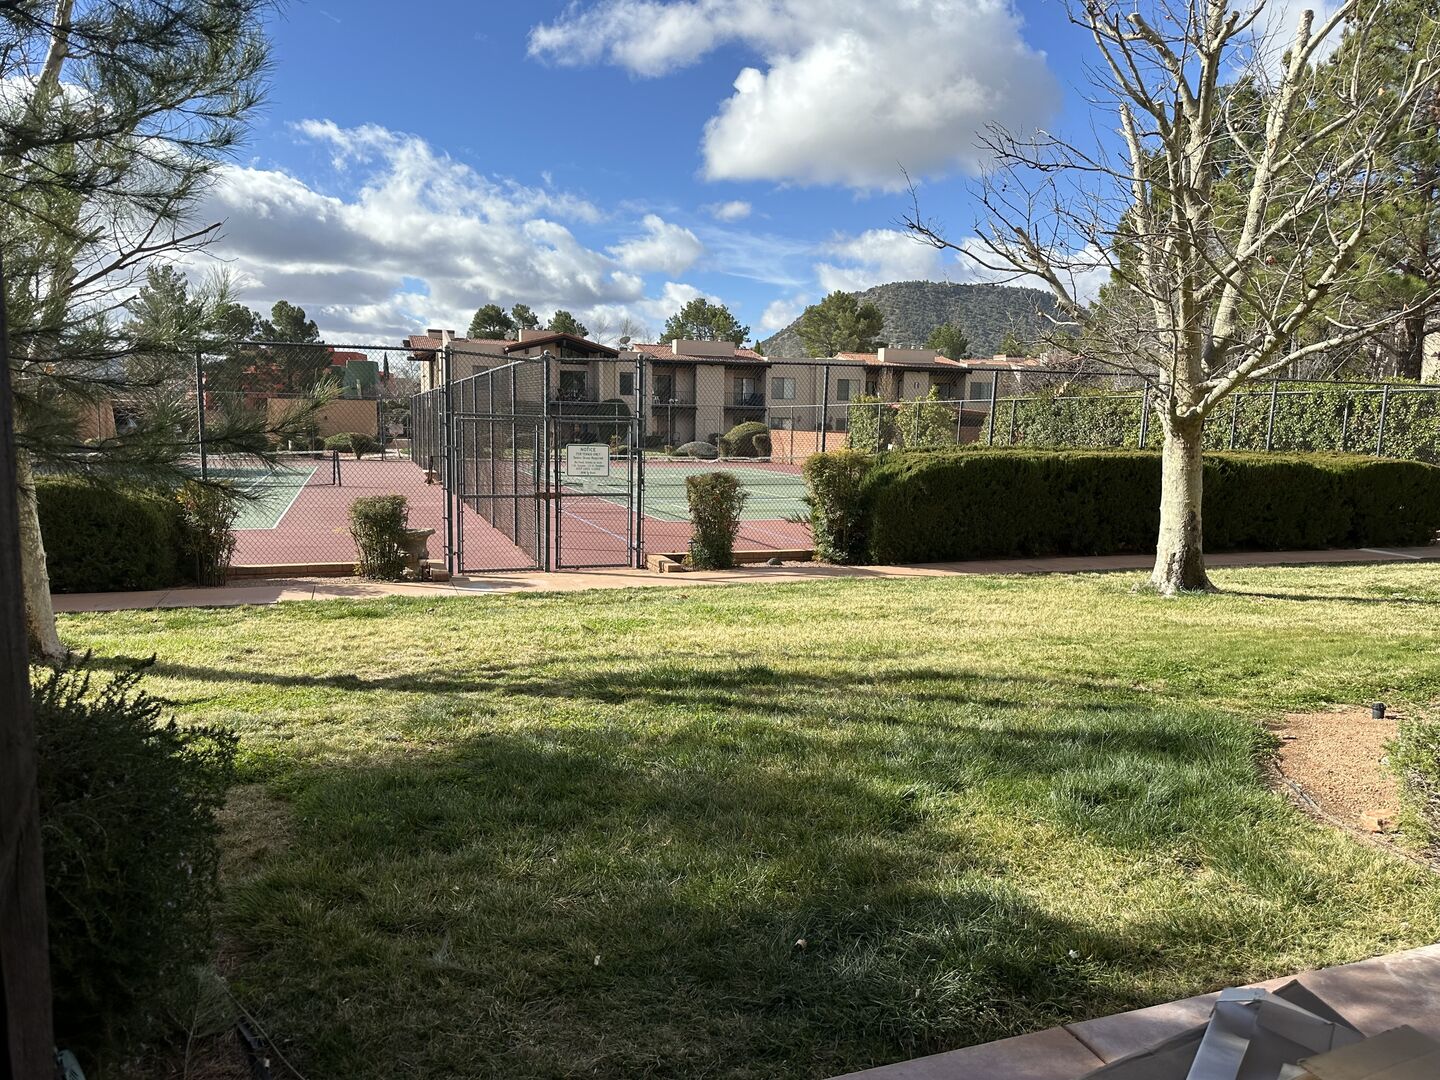 Walk Right Out the Patio to the Tennis Courts!